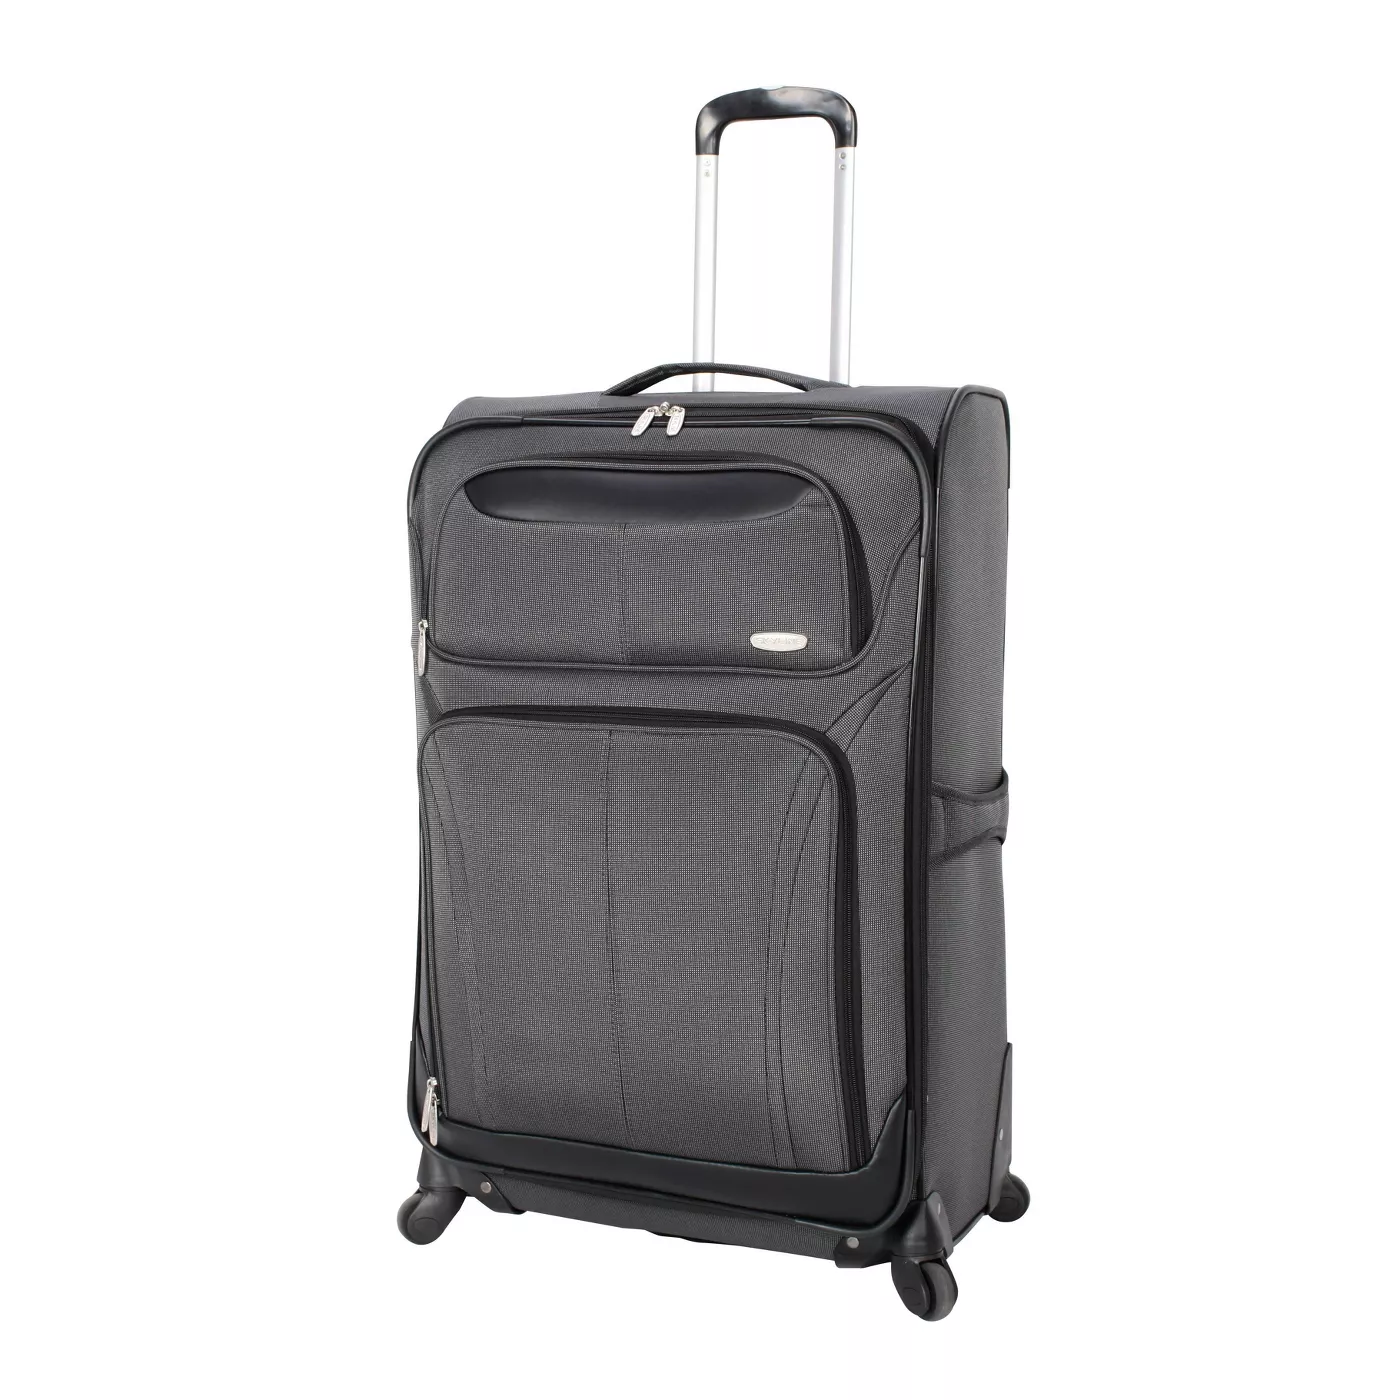 Skyline 21" Spinner Carry On Suitcase - Gray - image 2 of 9